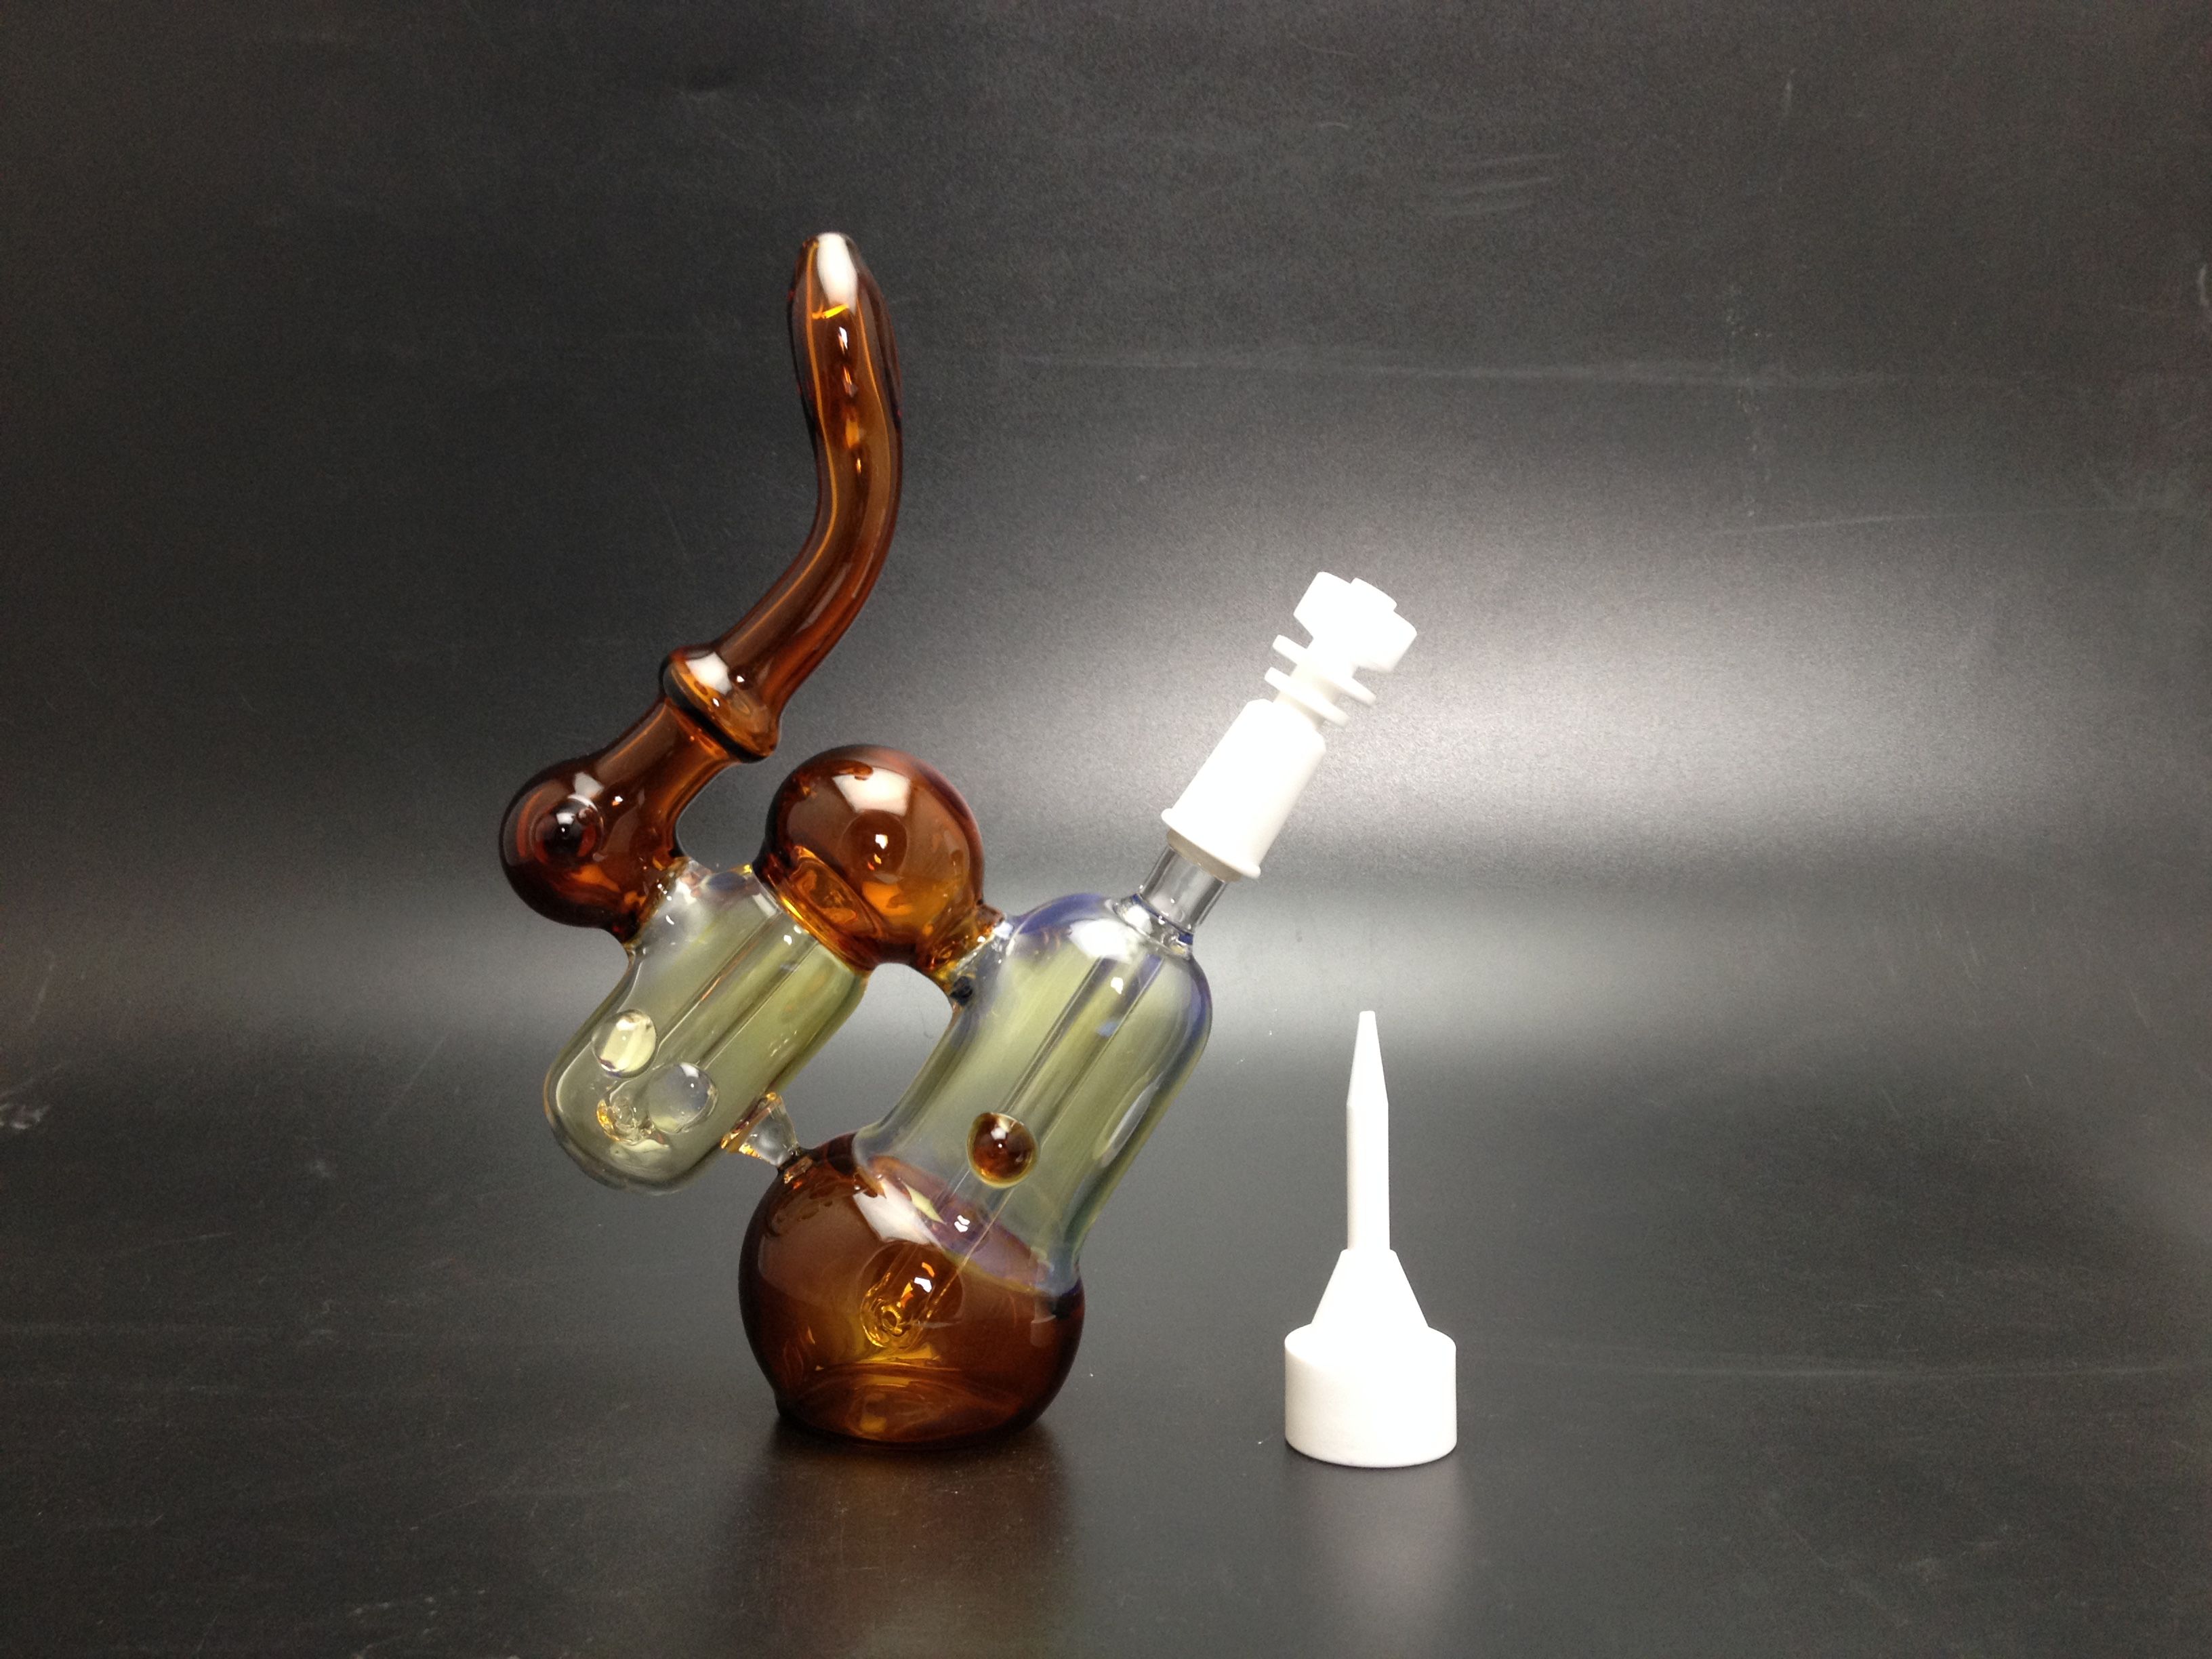 7.87%20inch%20Glass%20Oil%20rigs%20Concentrated%20oil%20rigs%20glass%20bongs%20water%20pipes%20with%20double%20chamber%20perc%20with%20domeless%20ceramic%20nail%20and%20carb%20cap.jpg